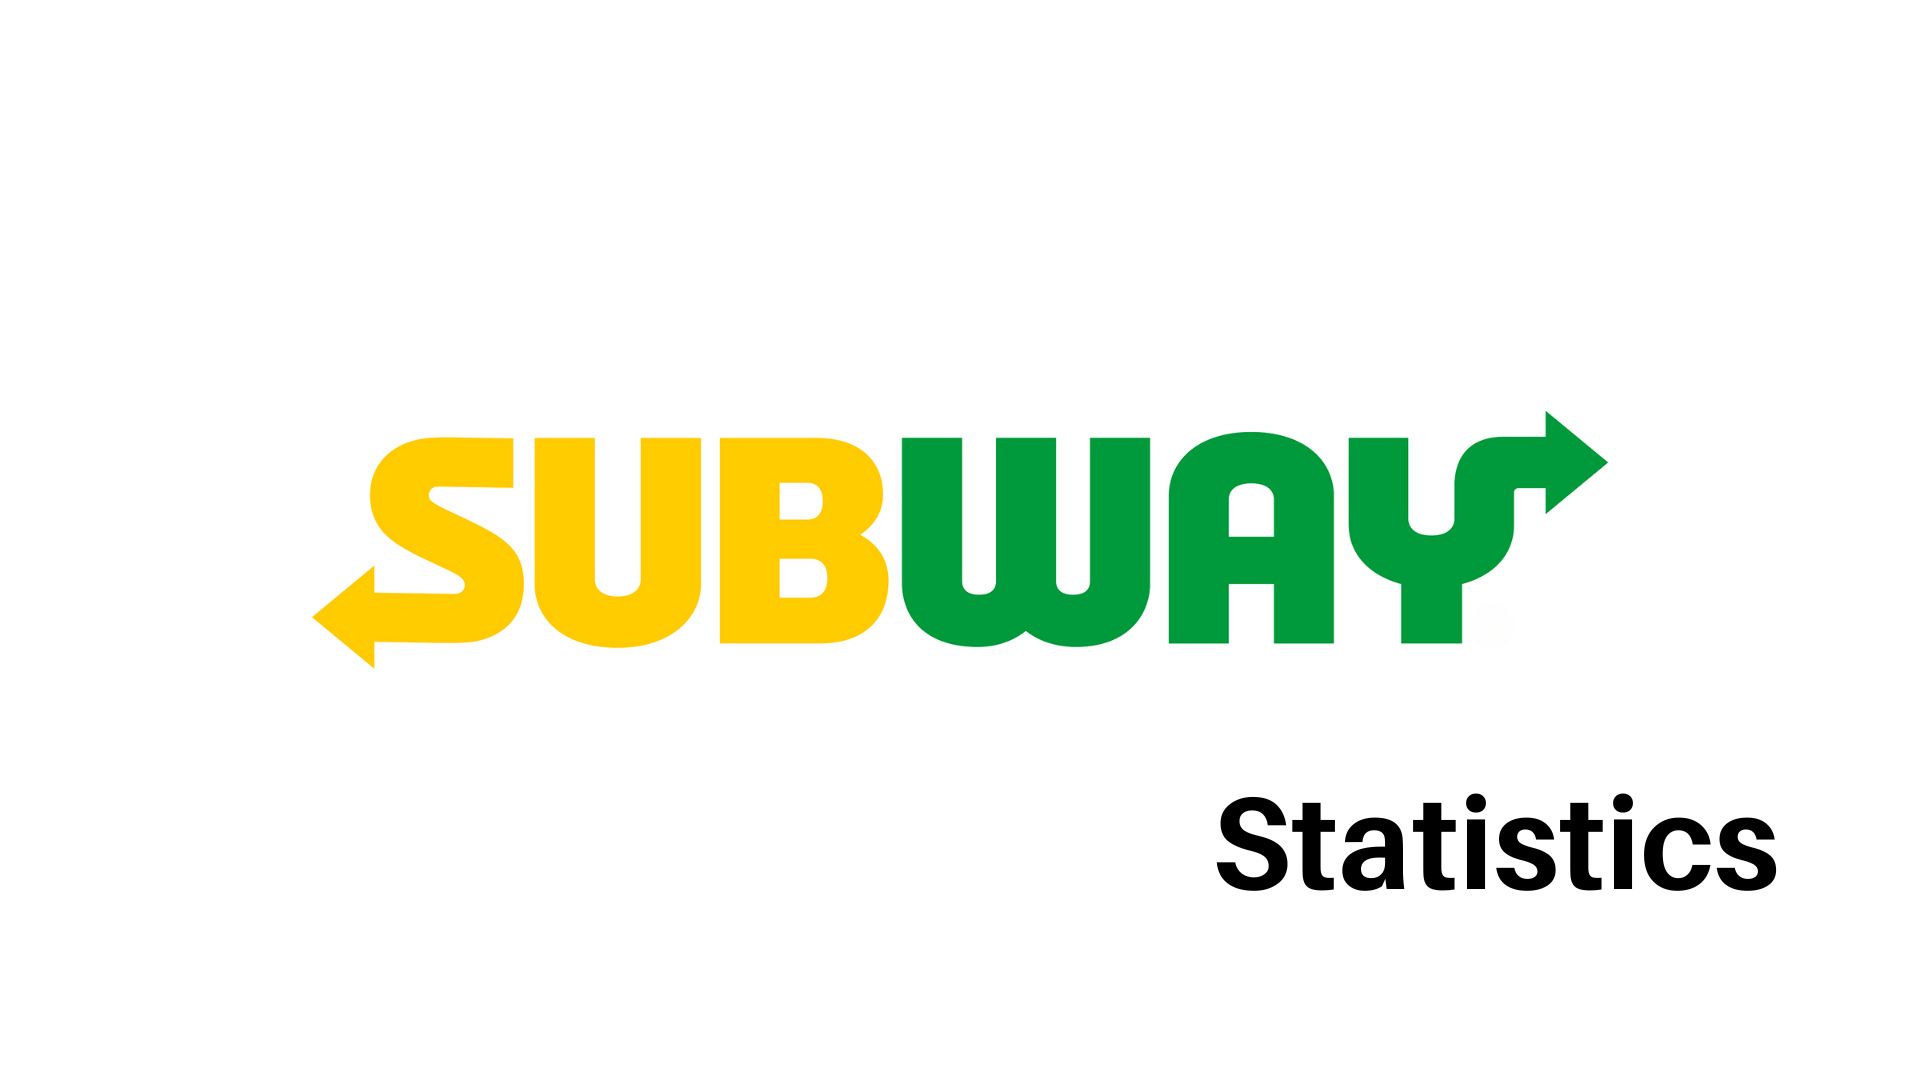 Subway Statistics 2024 By Brand Awareness in the USA, Brand Value and Digital Business